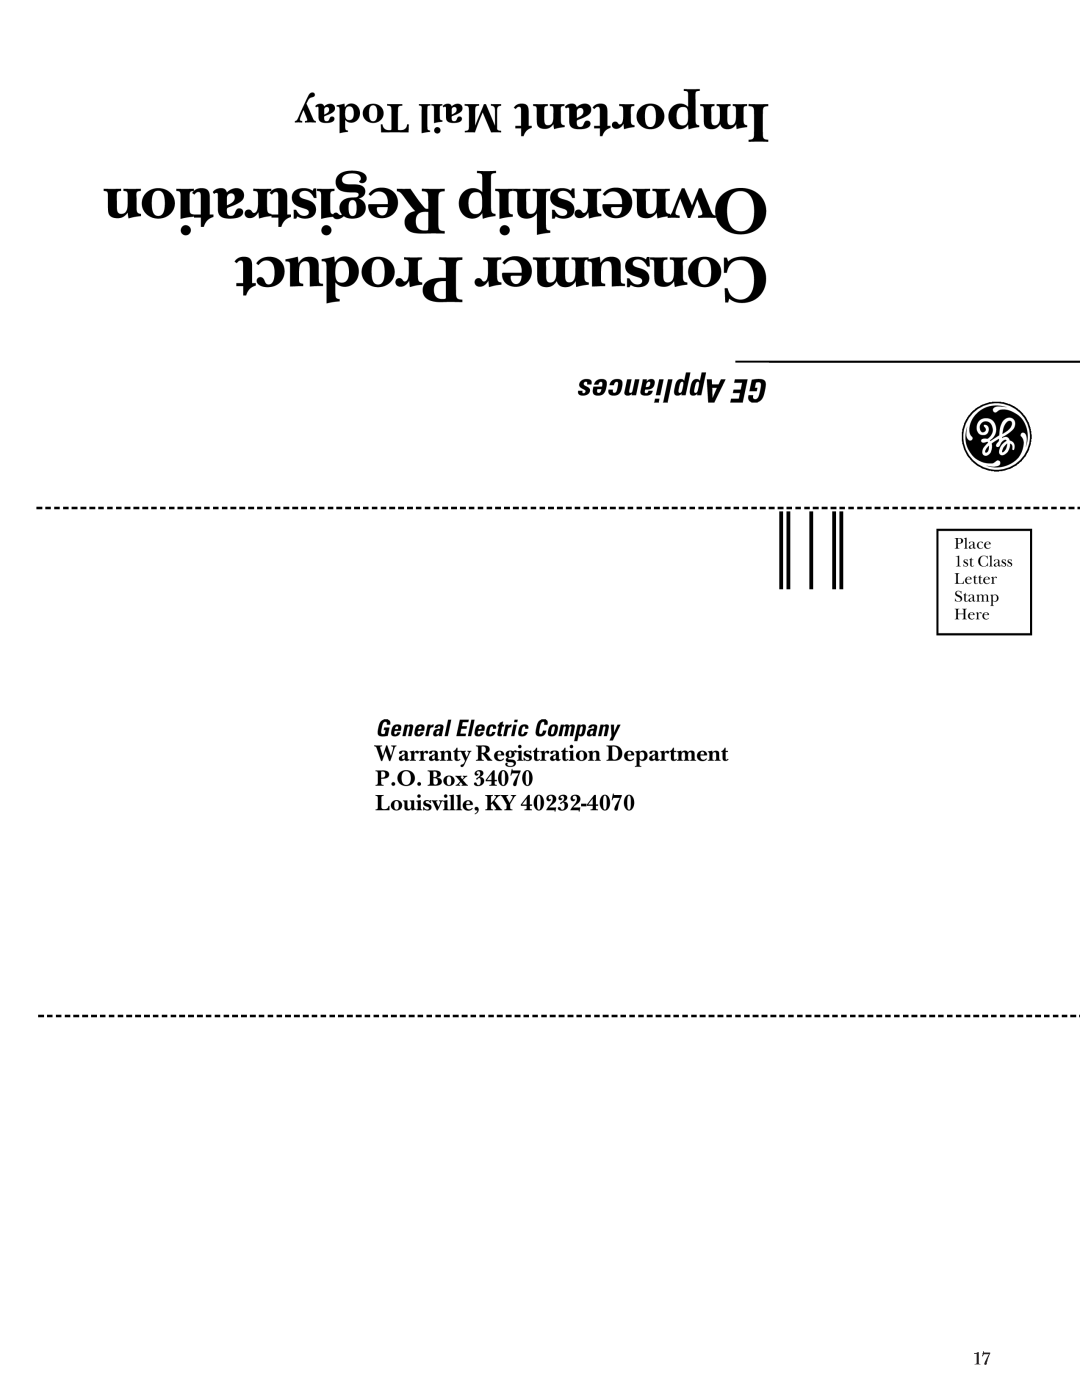 GE Monogram ZDB24 Today Mail Important, Registration Ownership Product Consumer, Appliances GE, General Electric Company 